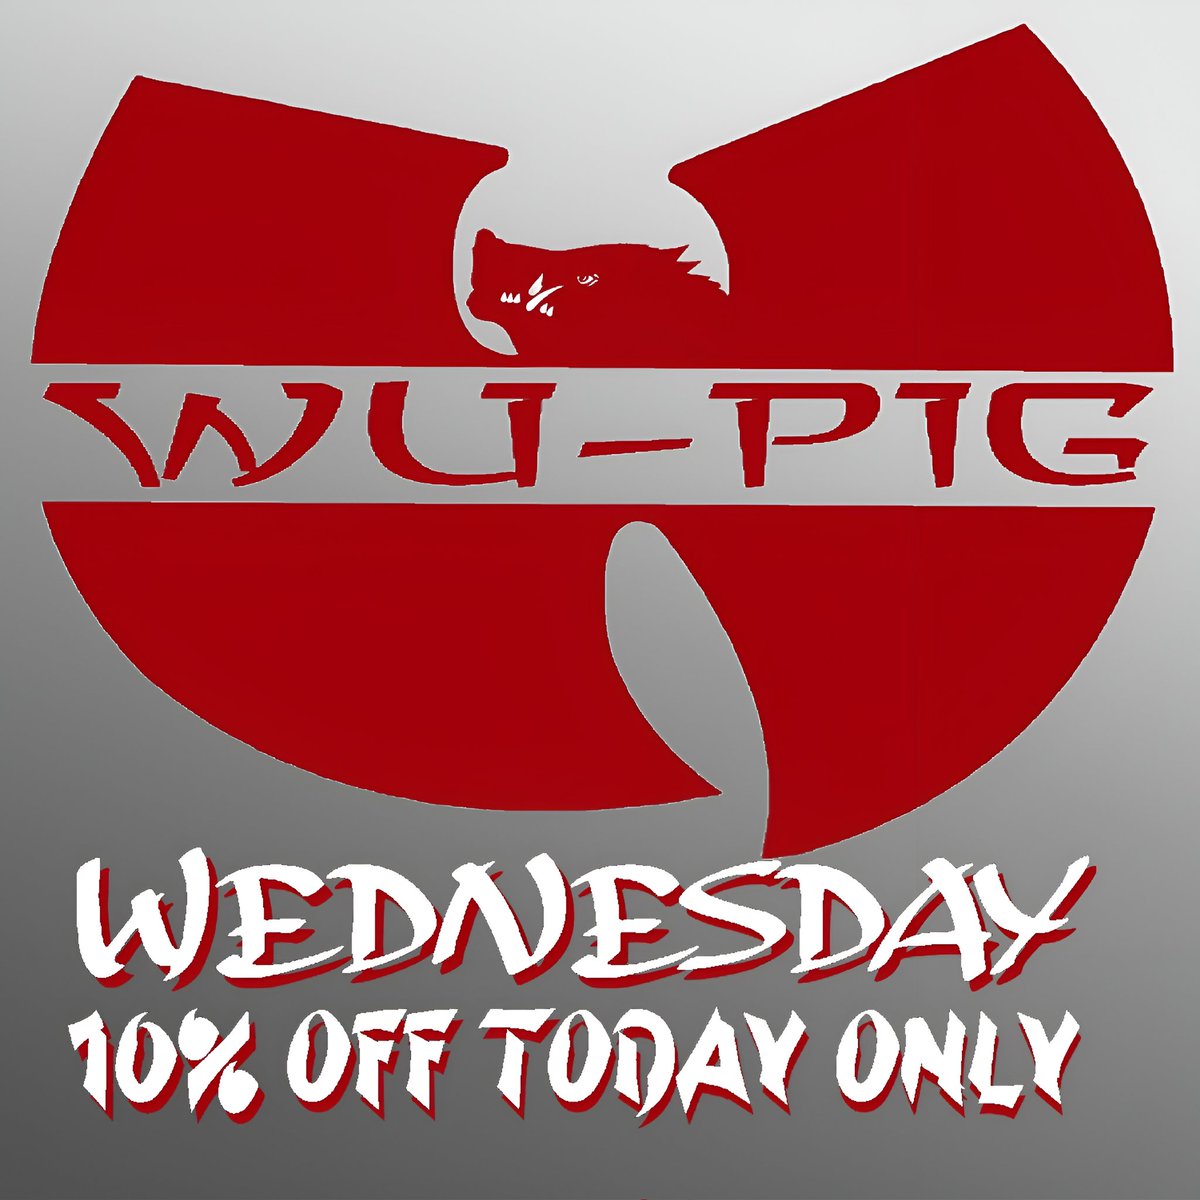 It's Wu-Pig Wednesday!! If you've been on the fence, today's the day! 10% off both Wu-Pig designs for 24 hours only!!! #WPS #WUPIG #Arkansas
#Razorbacks

etsy.com/listing/140812…